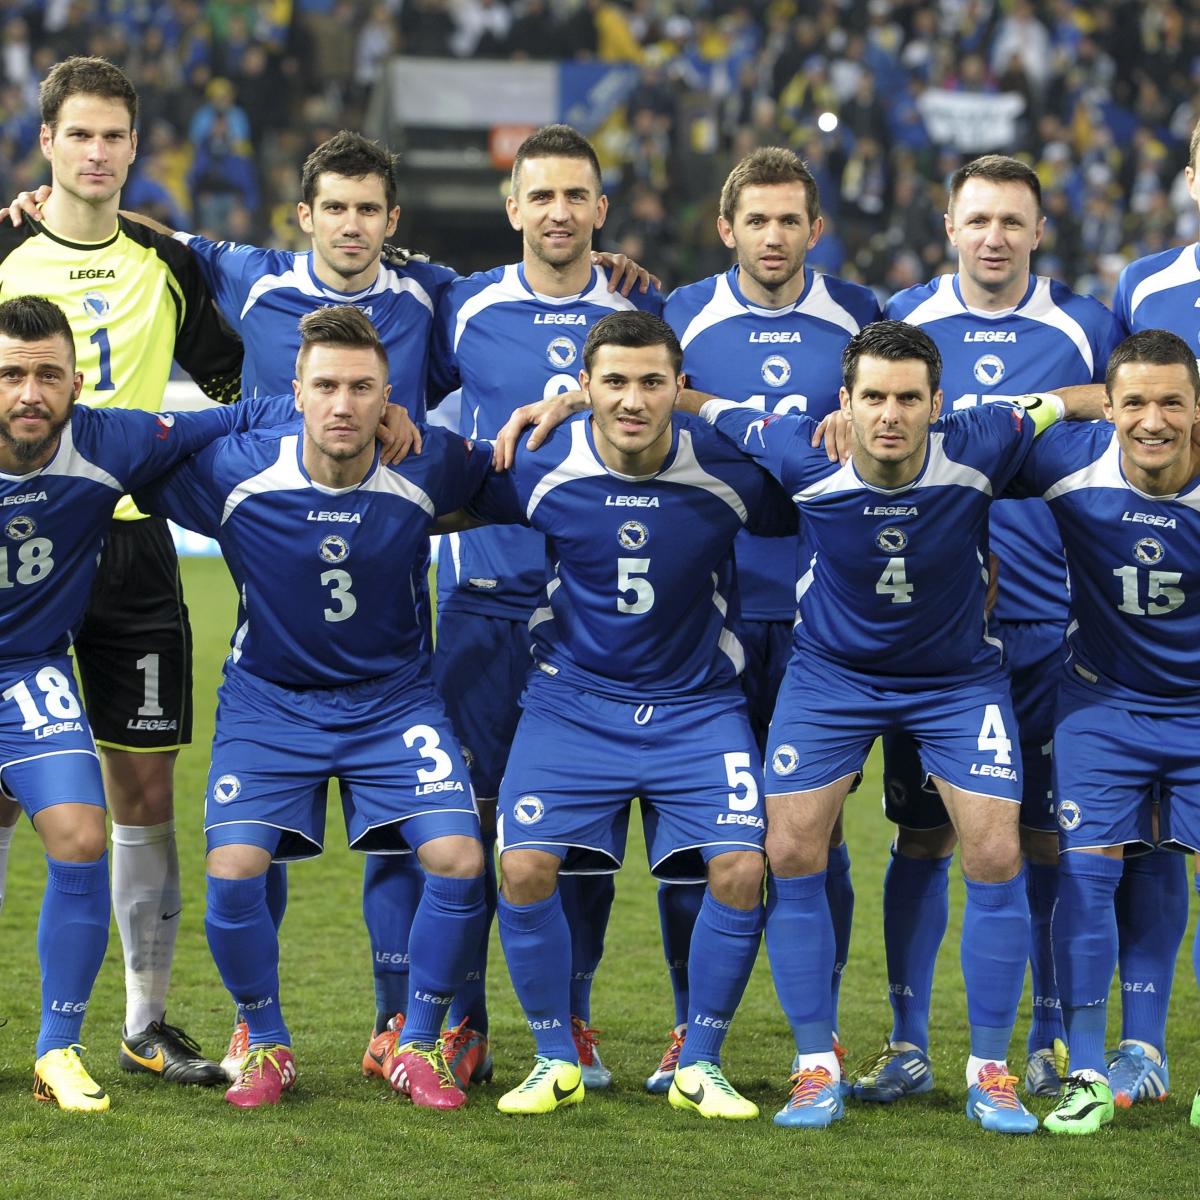 Bosnia And Herzegovina 2014 Fifa World Cup Squad Player By Player Guide Bleacher Report